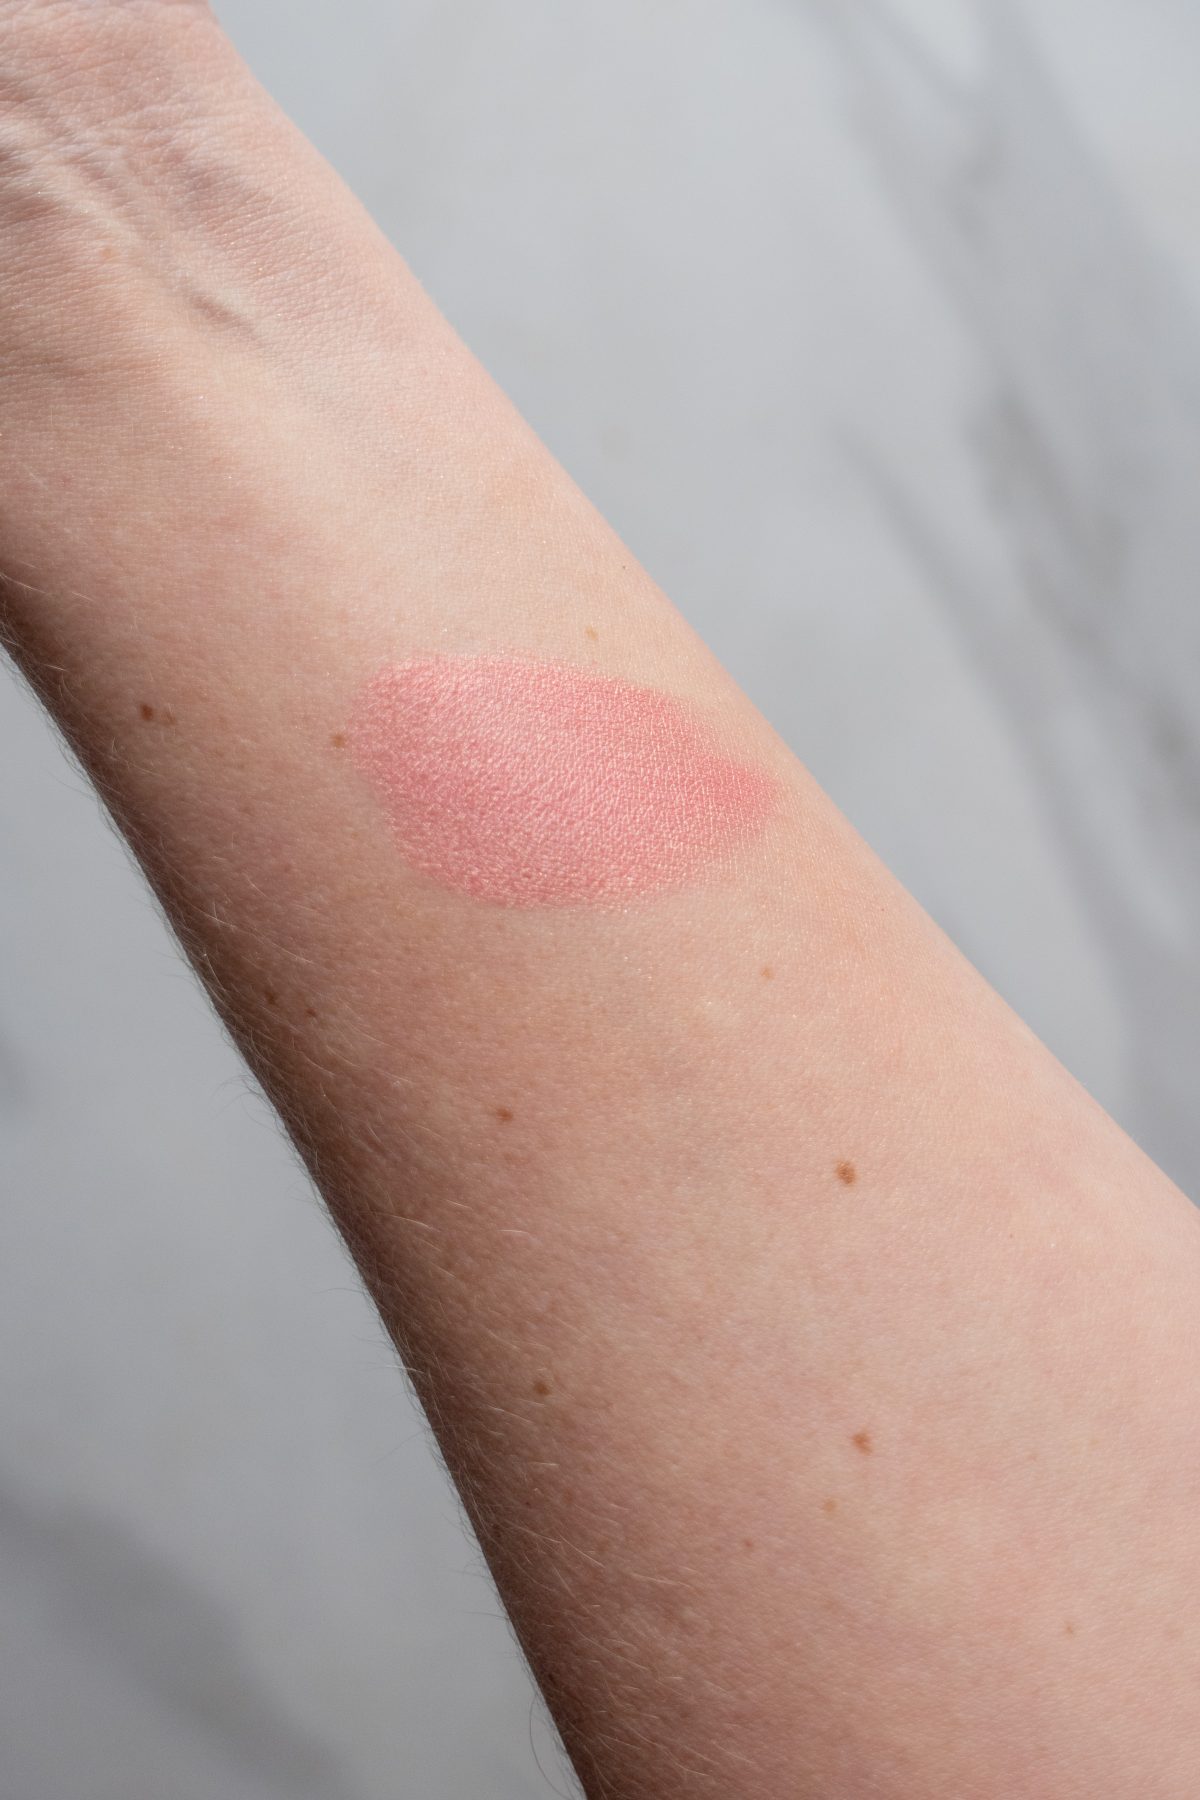 Milani Baked Blush Review and Swatches - Dolce Pink Swatch